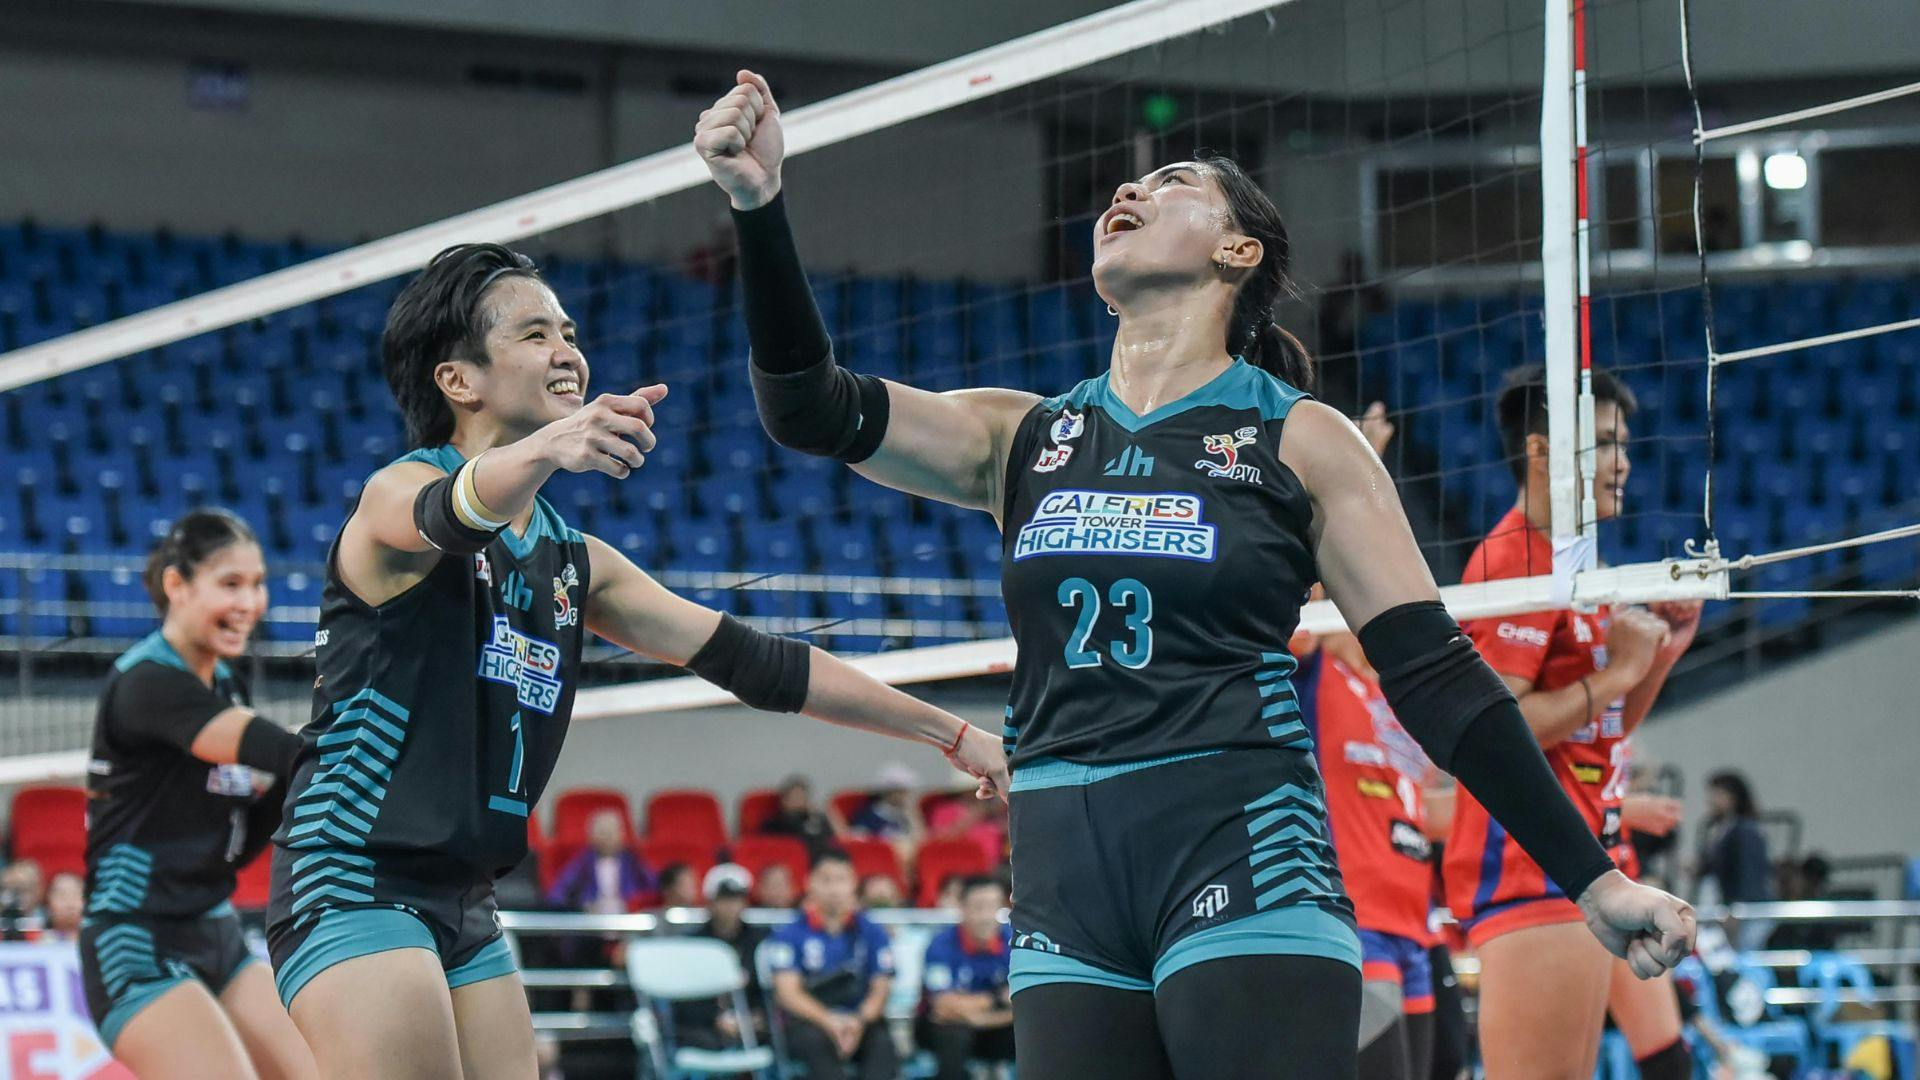 ‘Feel namin championship ito’: Galeries finds elusive first win in PVL after overcoming Gerflor in five sets